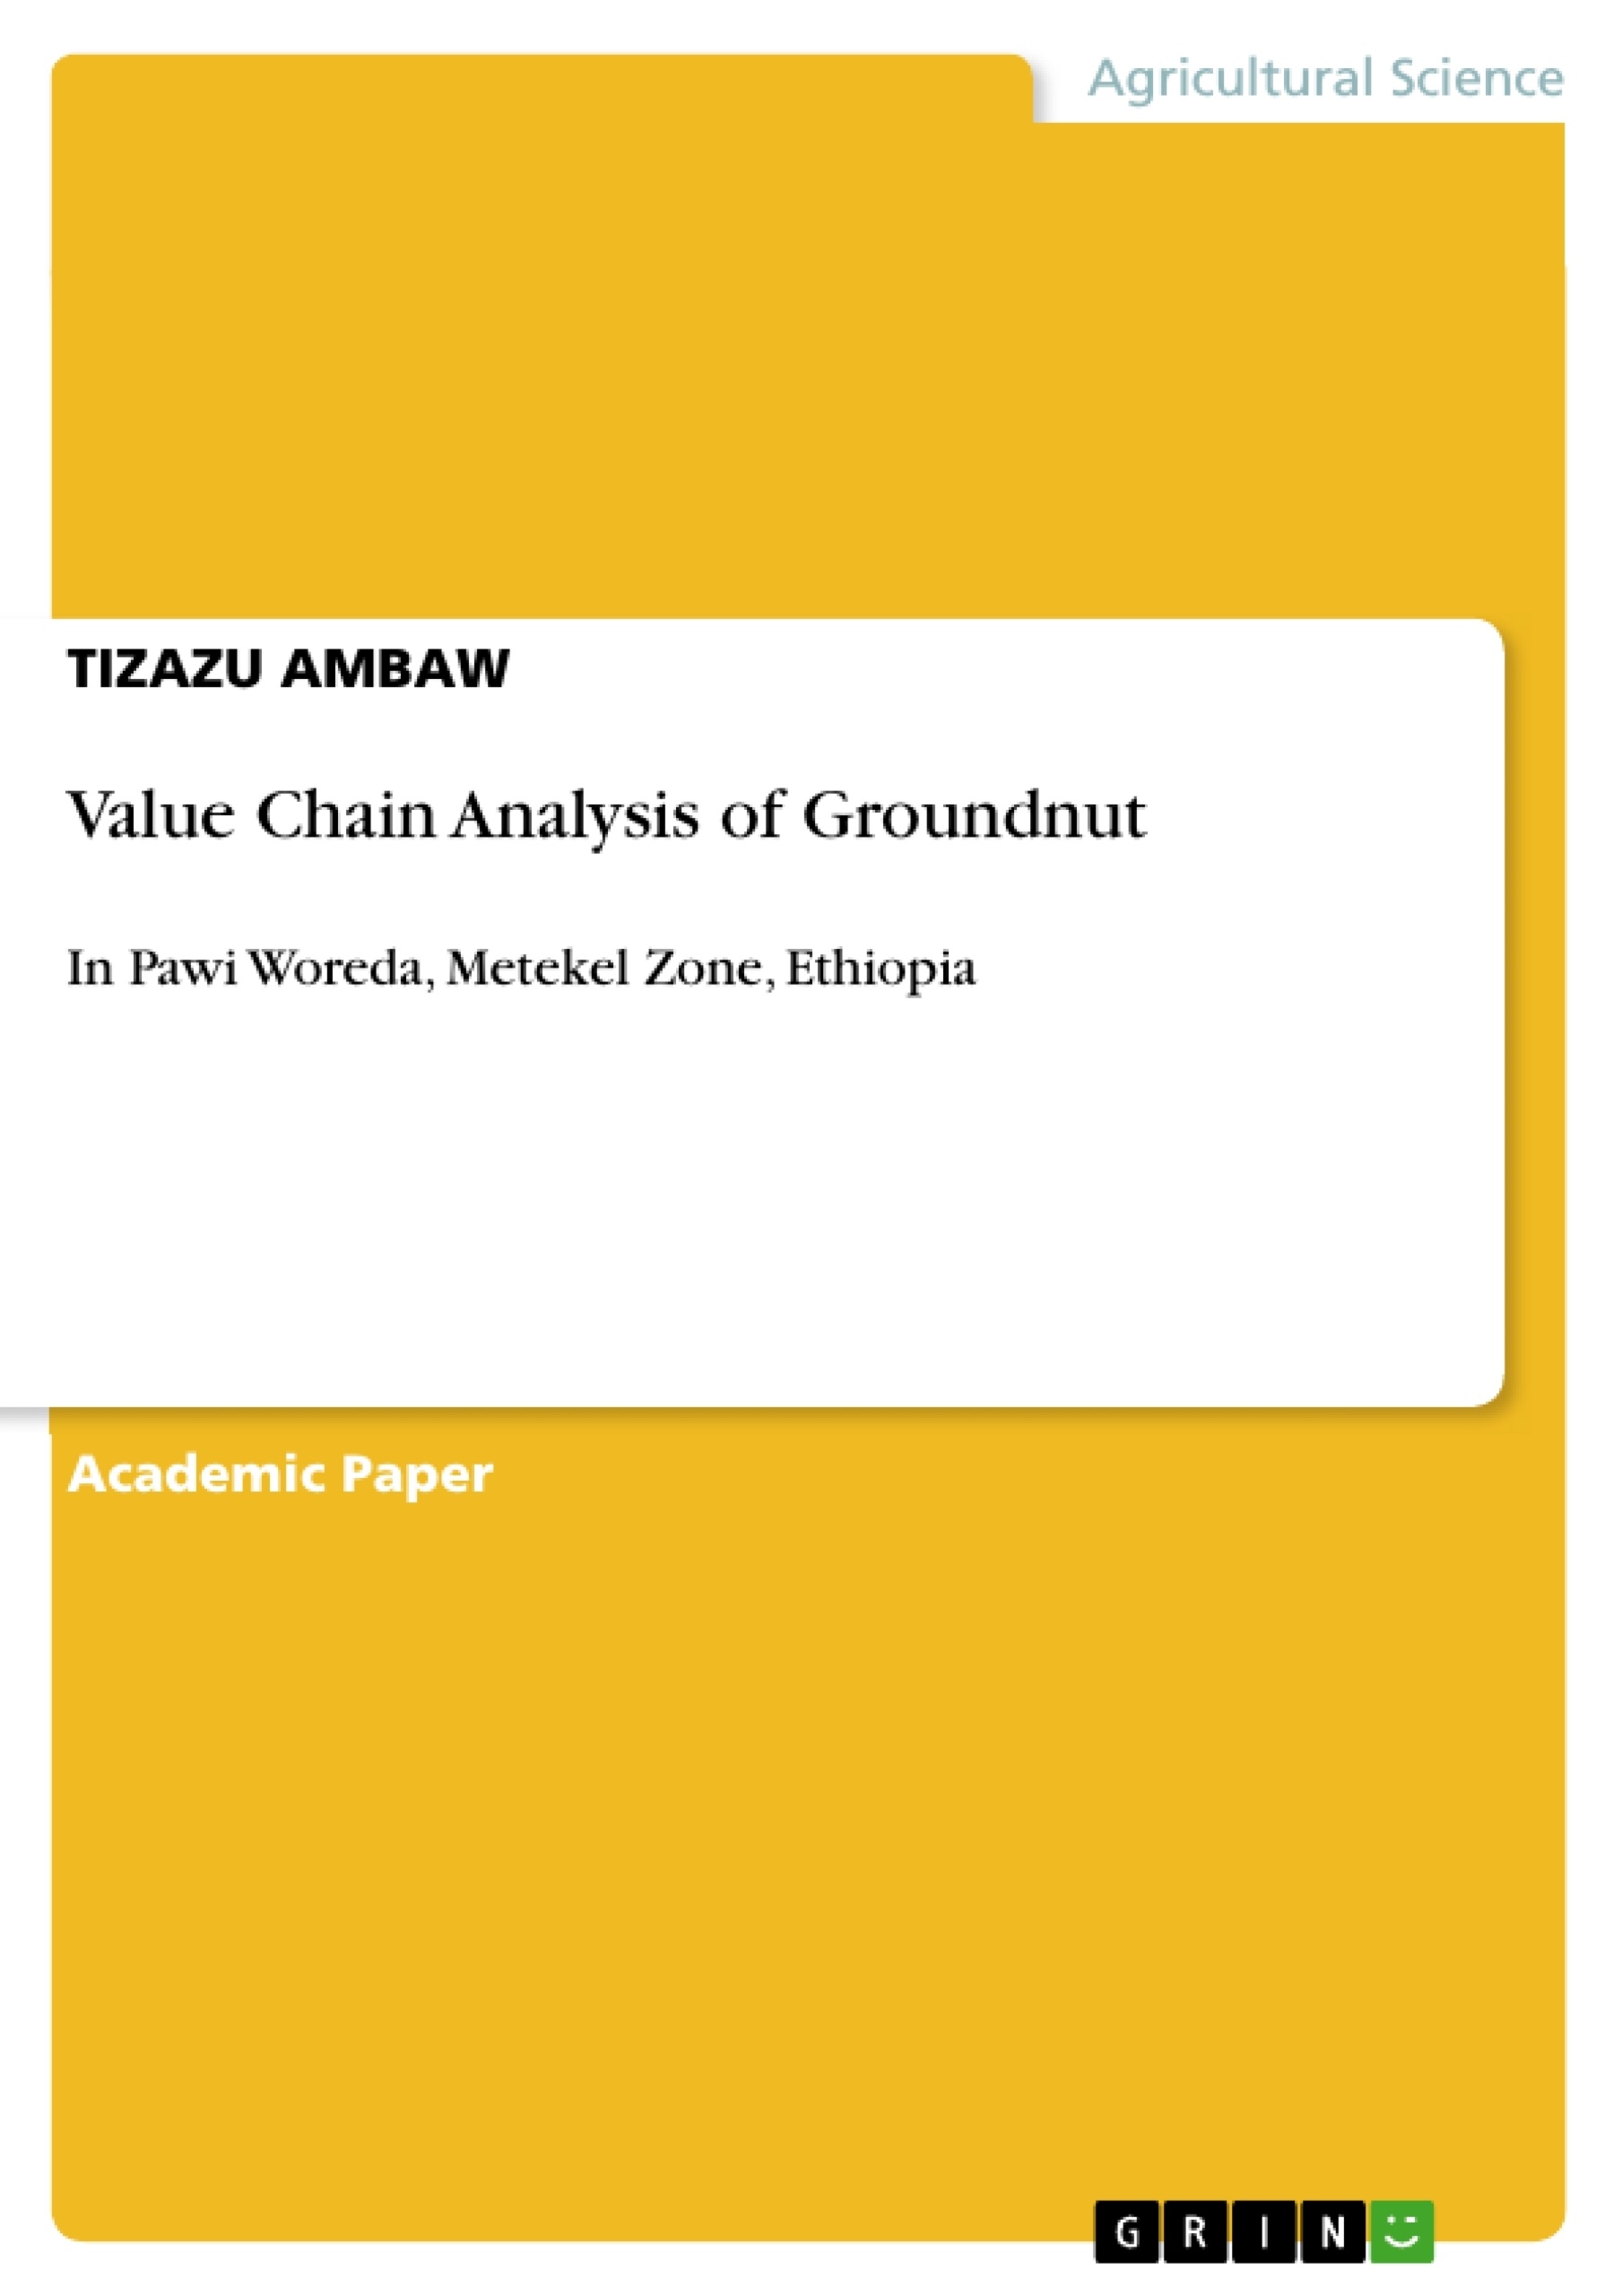 Titre: Value Chain Analysis of Groundnut